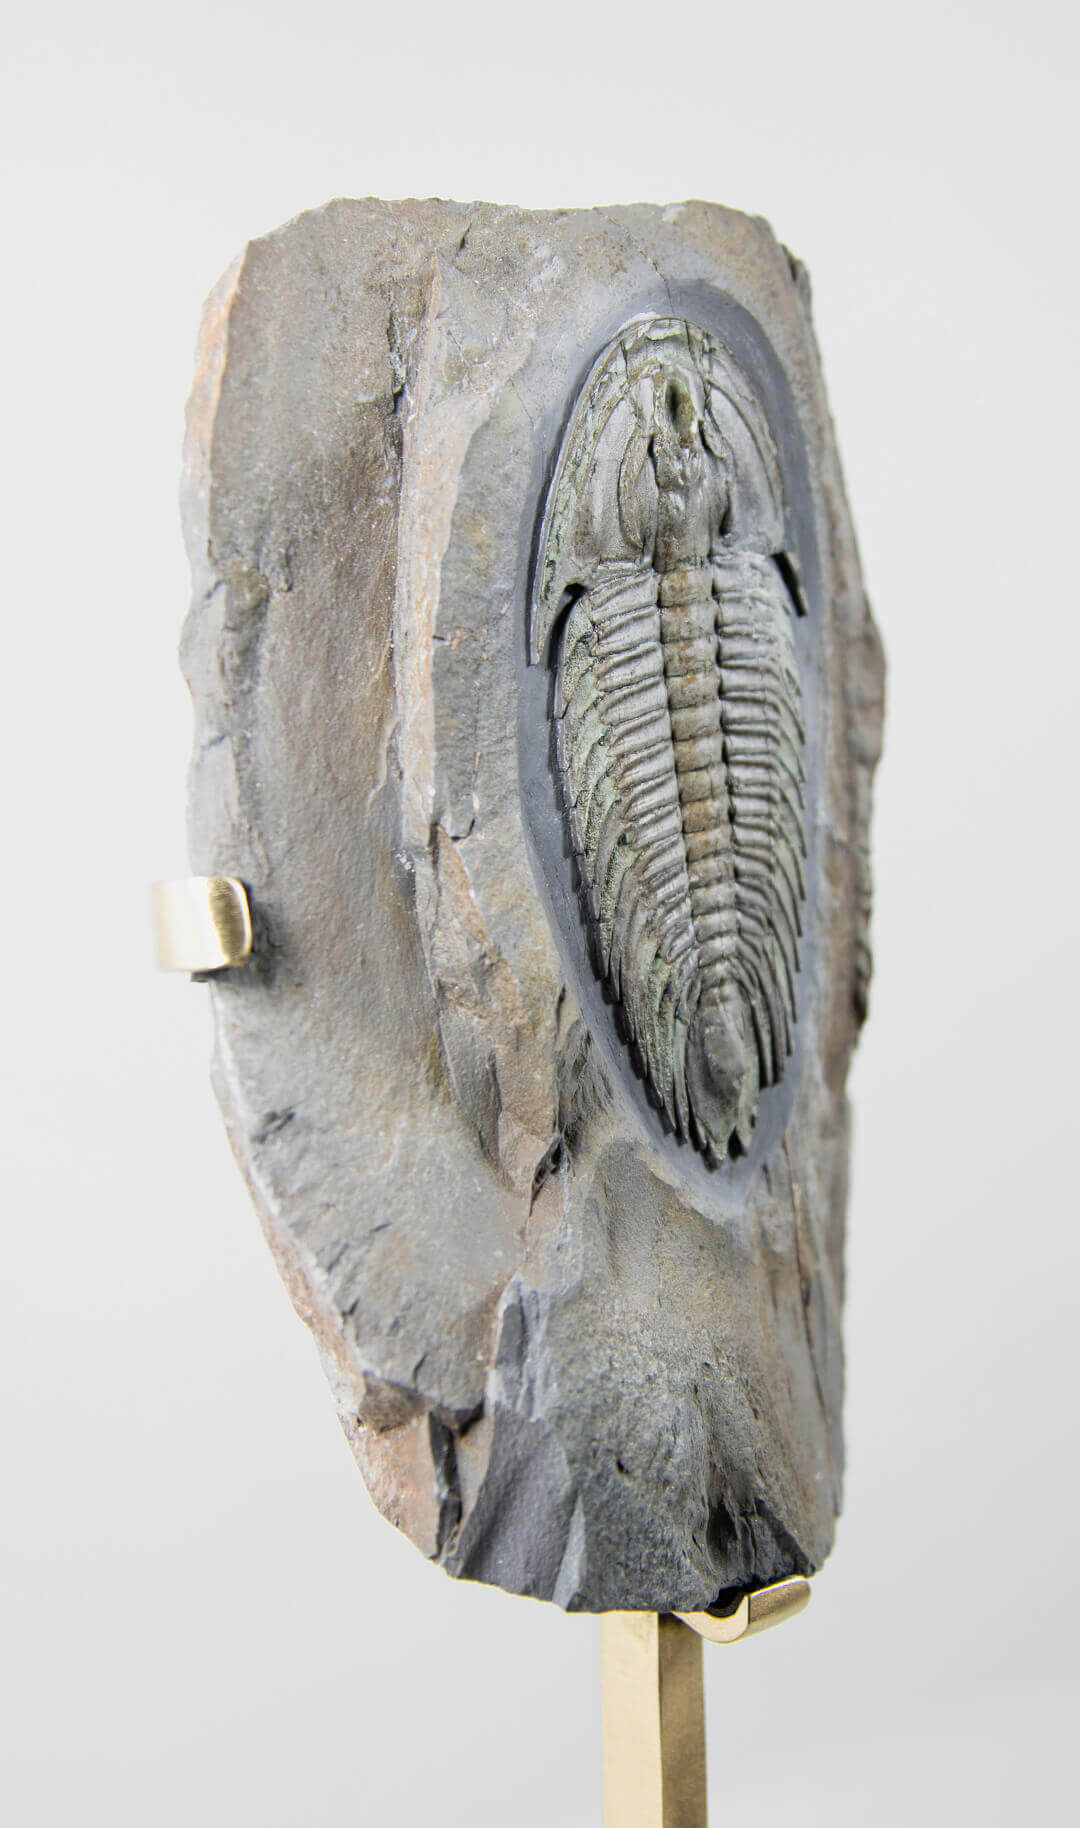 Fossil trilobites for sale on brass stands for interiors at the fossil store 36